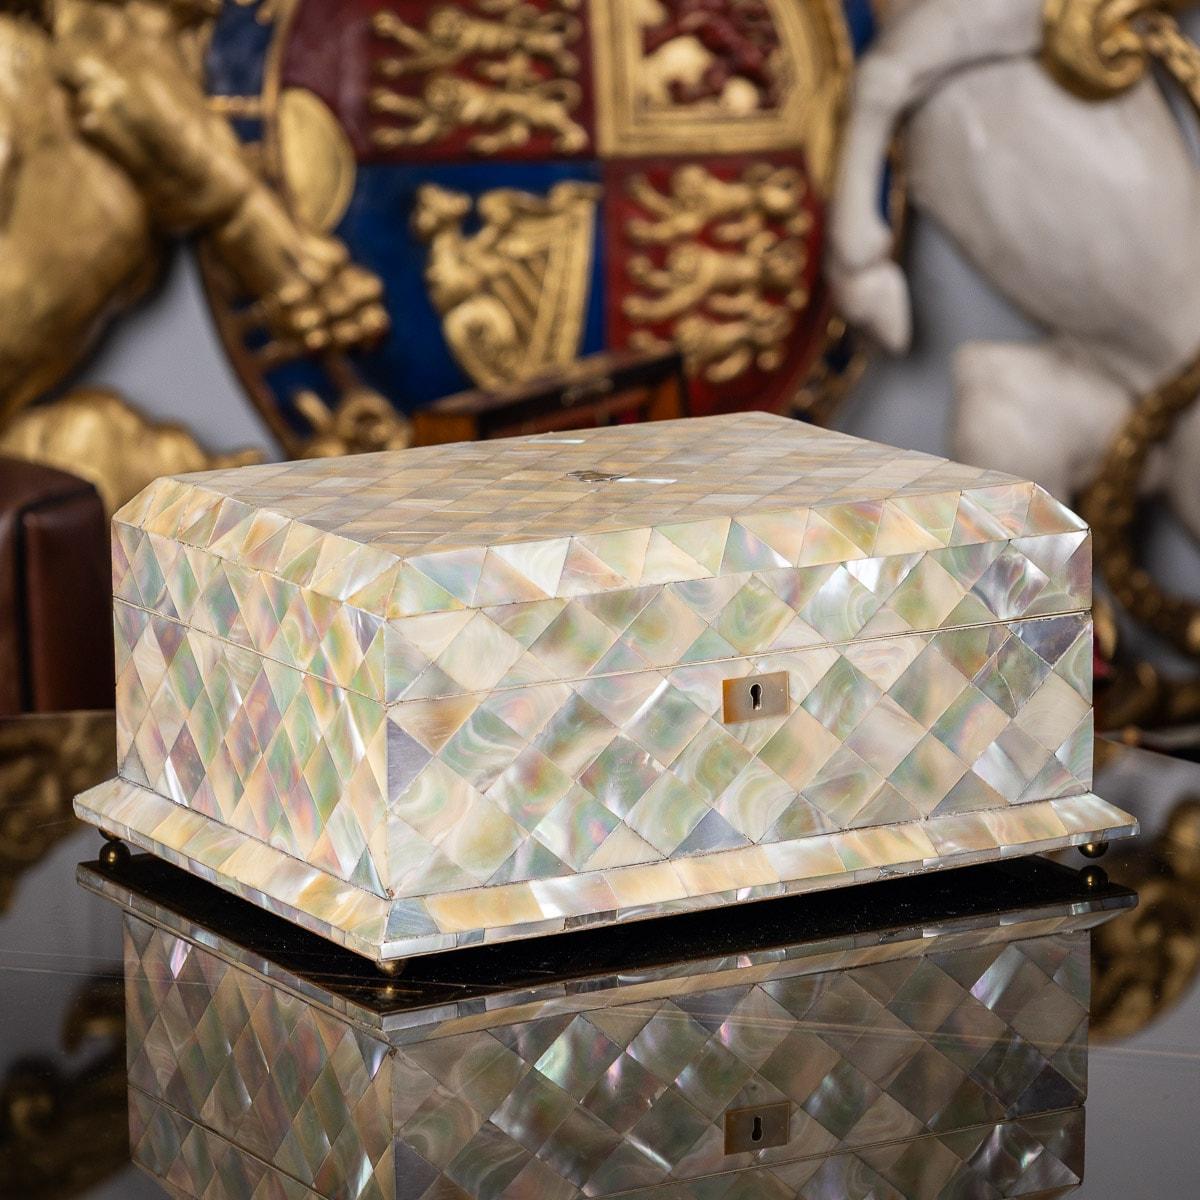 A stunning late 19th Century Victorian mother of pearl applied jewellery box. Dating back to 1880, this box has a fully covered outer body including the escutcheon. The hinged lid features a blank crest in solid silver. The inside of the jewellery